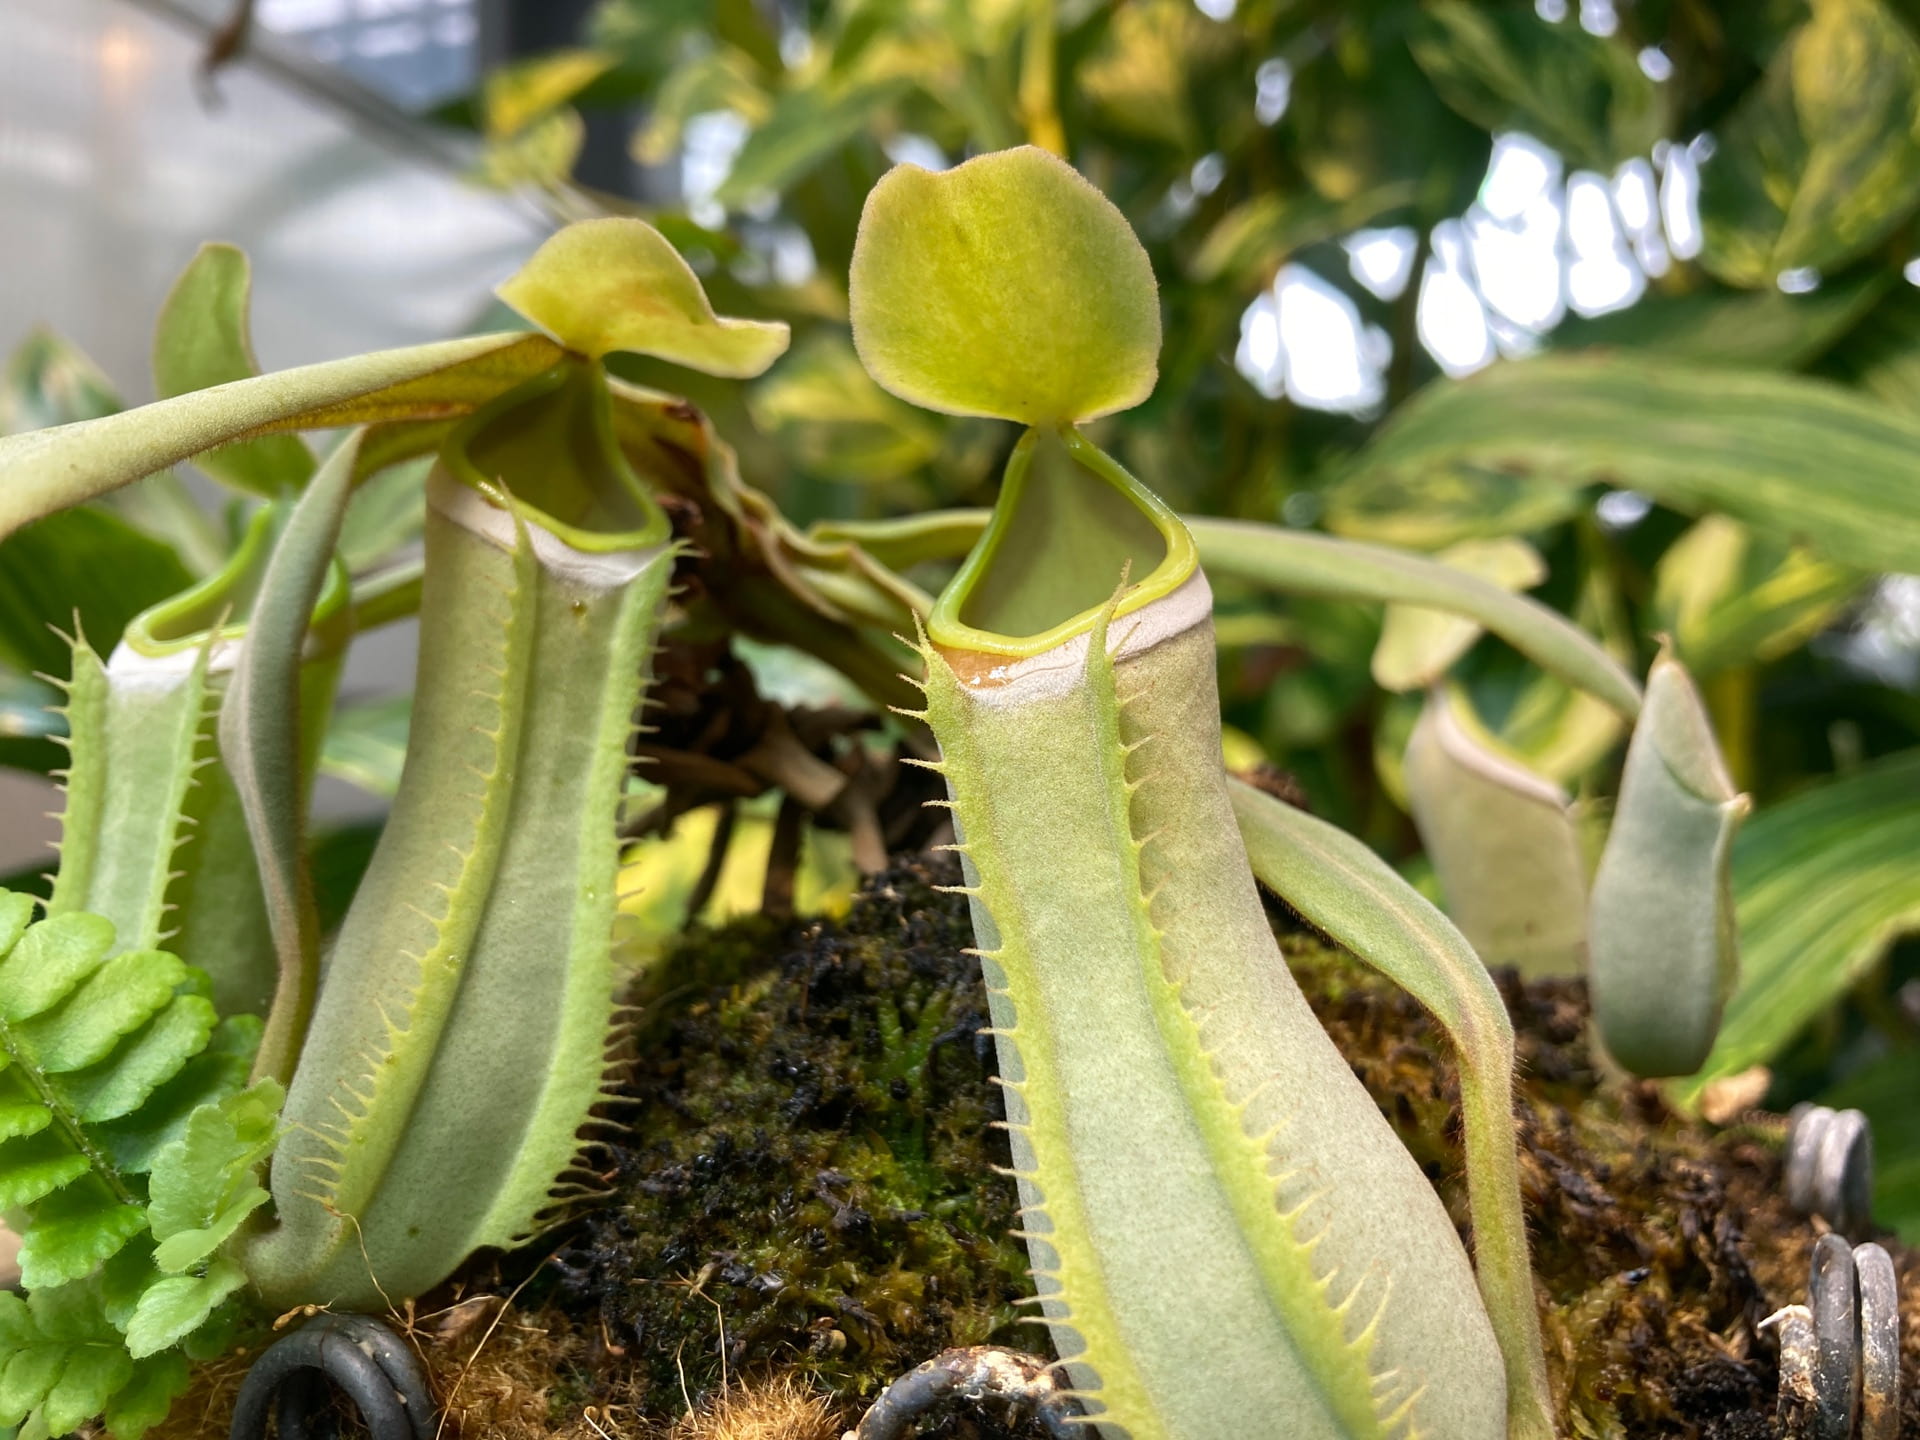 Passive carnivorous traps, seen in Nepenthes sp., Sarracinea sp., Heliamphor sp, and Cephalotus sp., lure prey into the modified leaves (seen here as a pitcher). They then cannot escape the slippery interior and are digested by an enzyme.